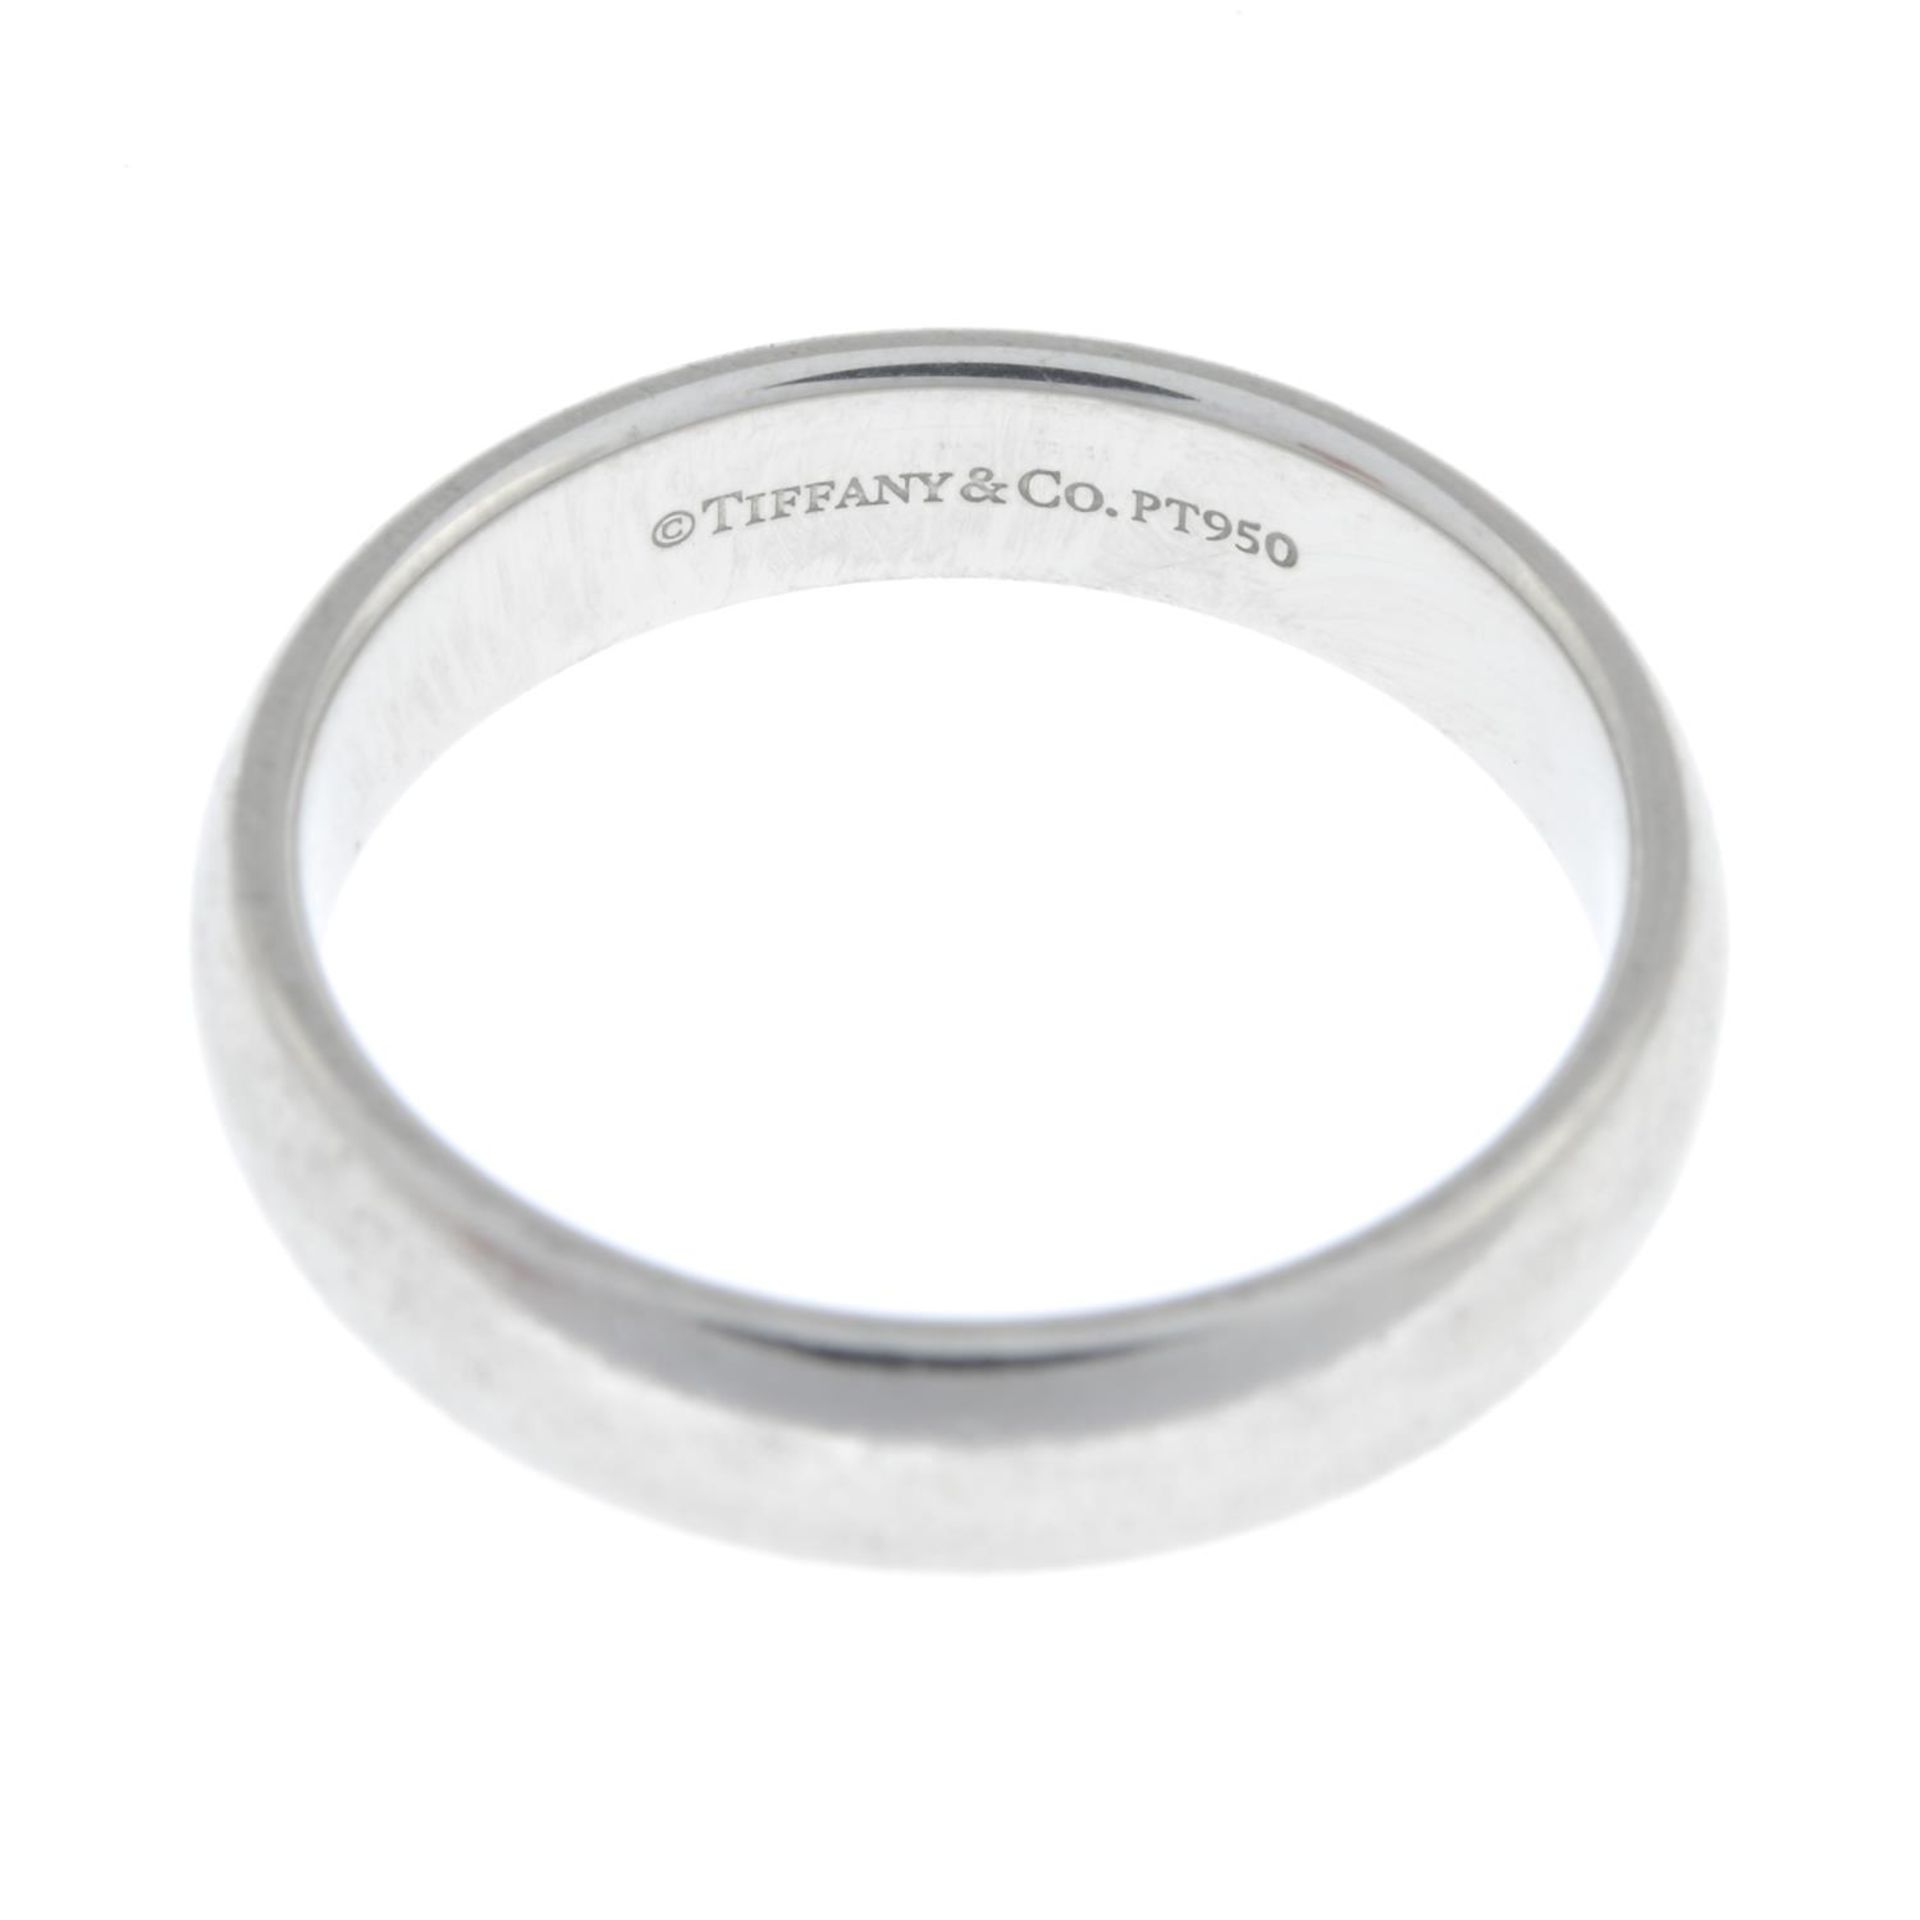 TIFFANY & CO. - a band ring. - Image 2 of 3